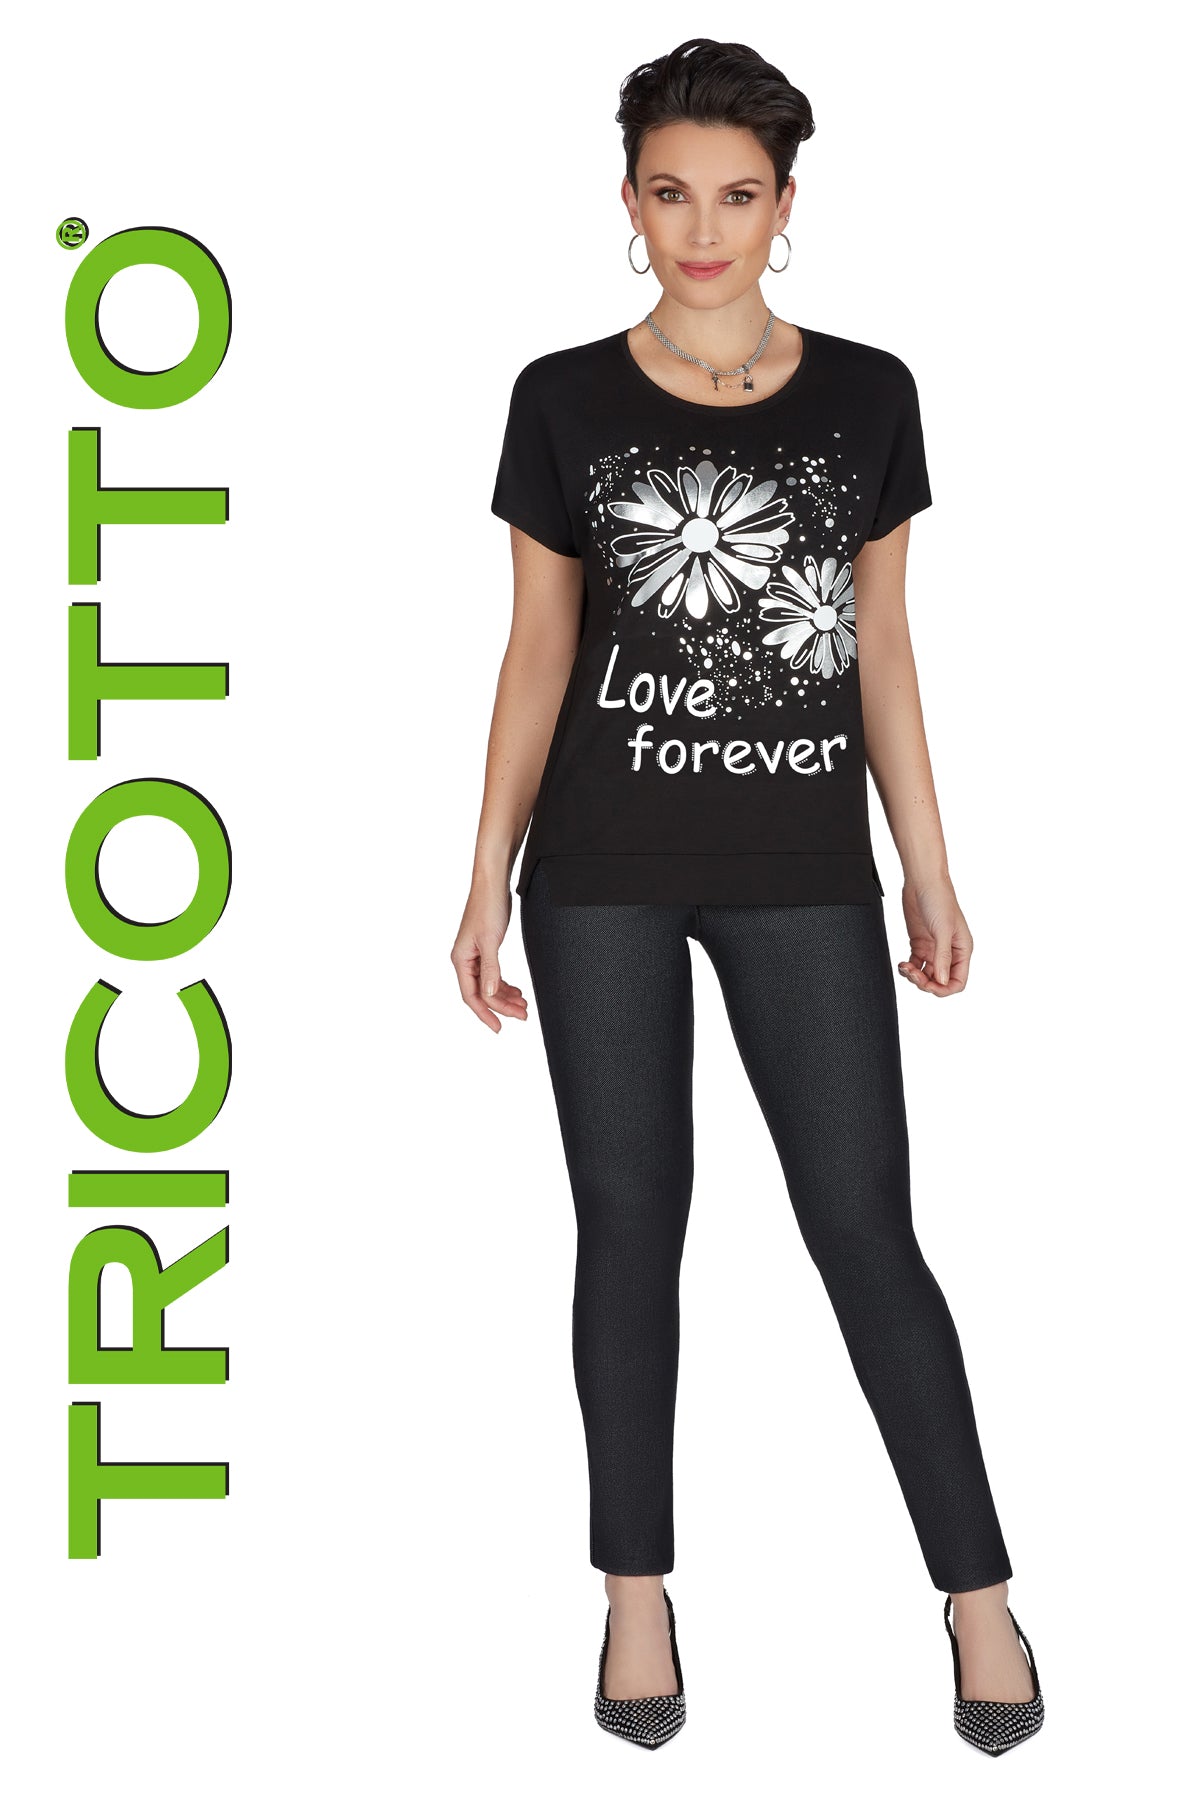 Tricotto T-shirts-Buy Tricotto T-shirts Online-Tricotto Clothing Montreal-Tricotto Clothing Quebec-Tricotto Online Shop-Women's T-shirts Online